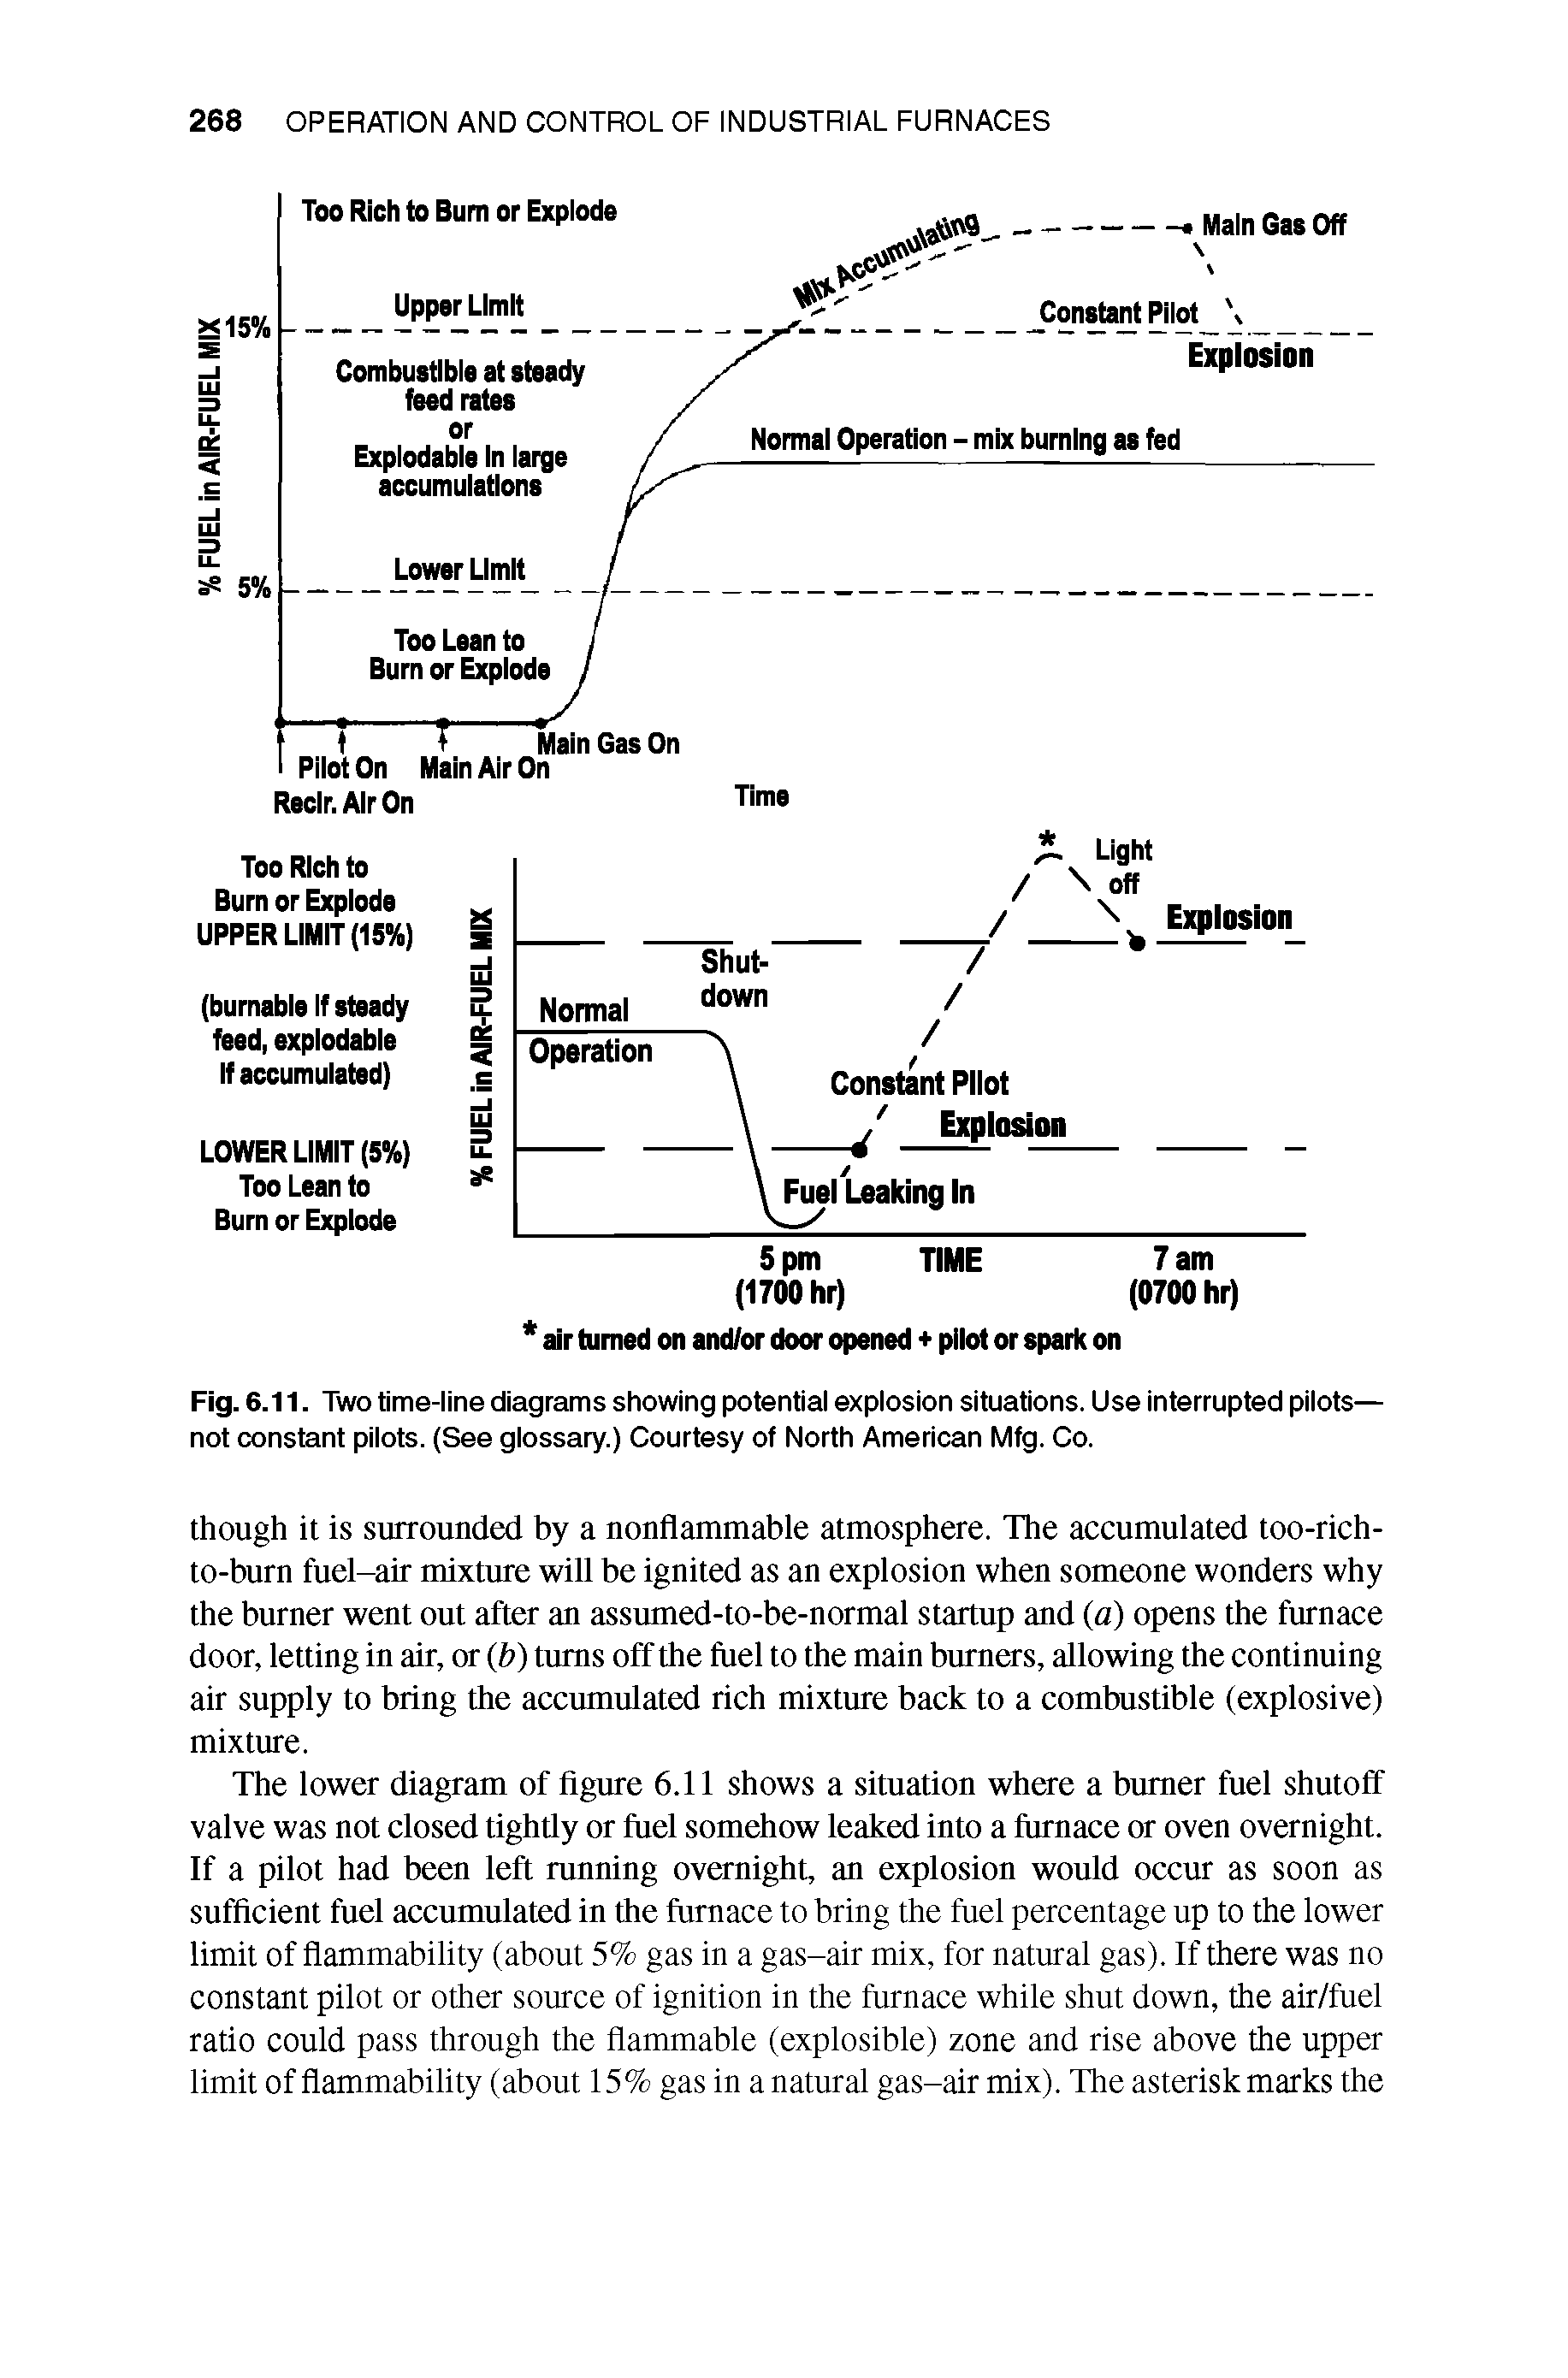 Fig. 6.11. Two time-line diagrams showing potential explosion situations. Use interrupted pilots-not constant pilots. (See glossary.) Courtesy of North American Mfg. Co.